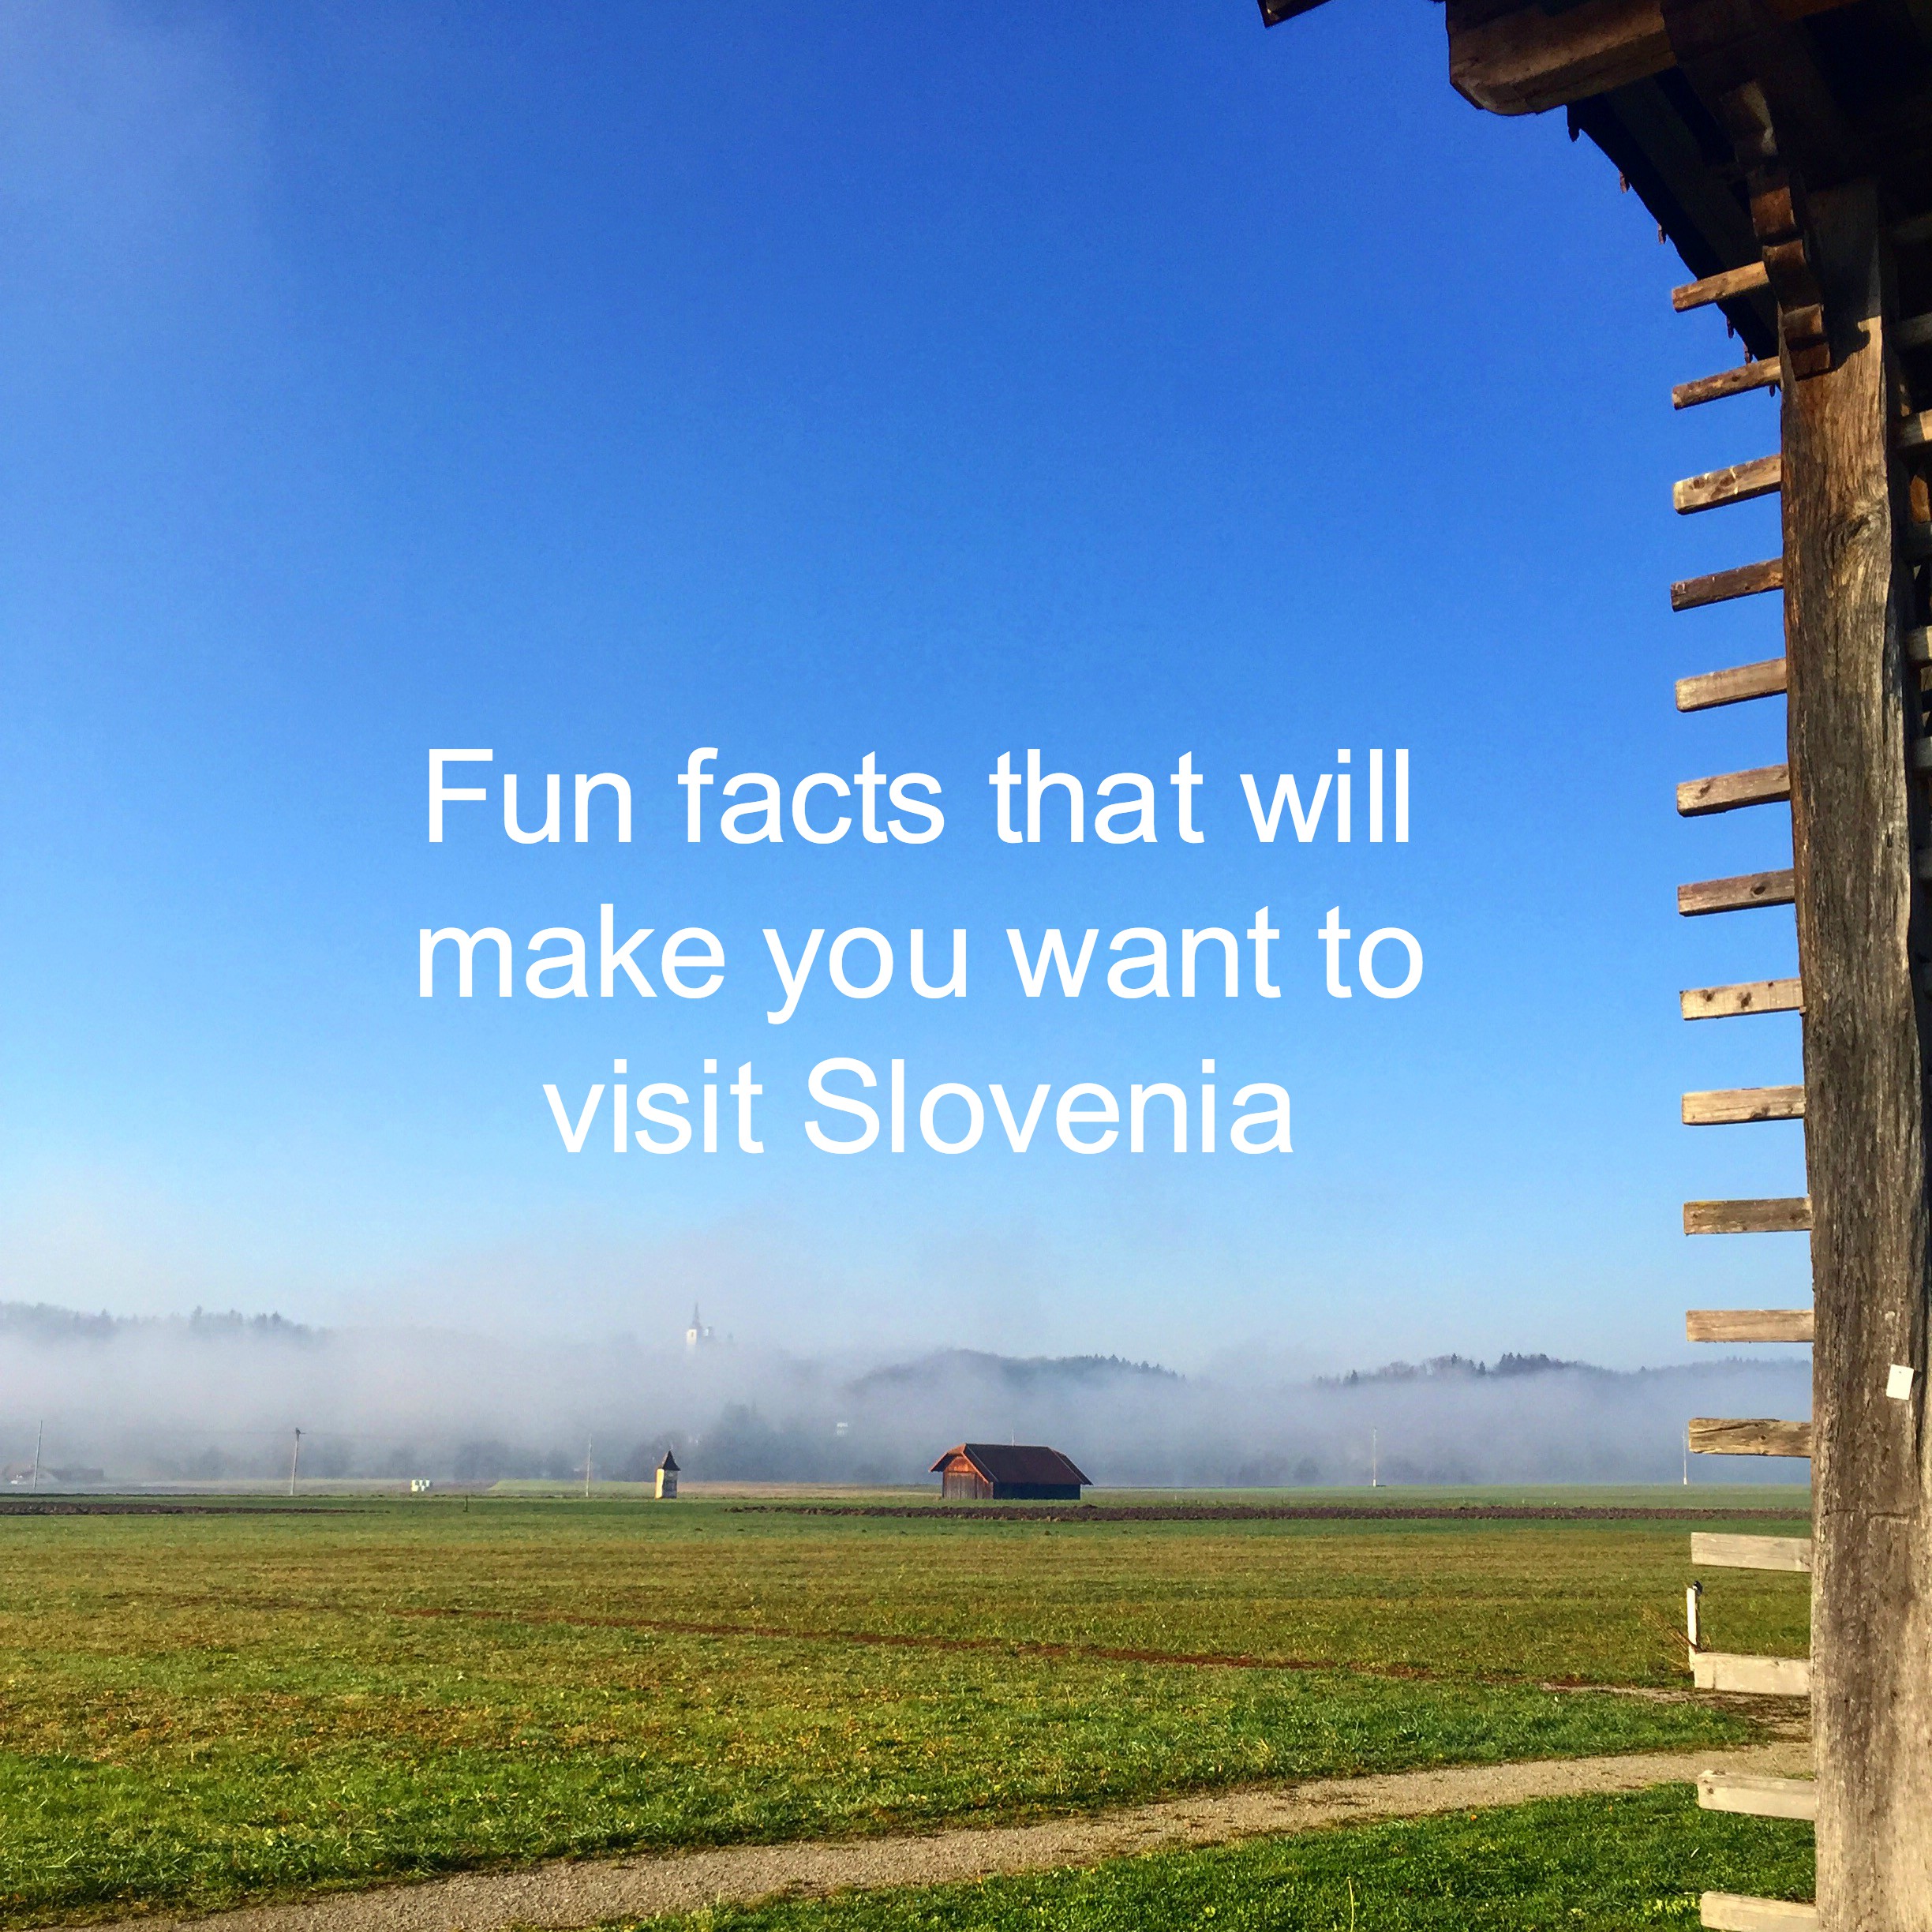 Fun facts that will make you want to visit Slovenia